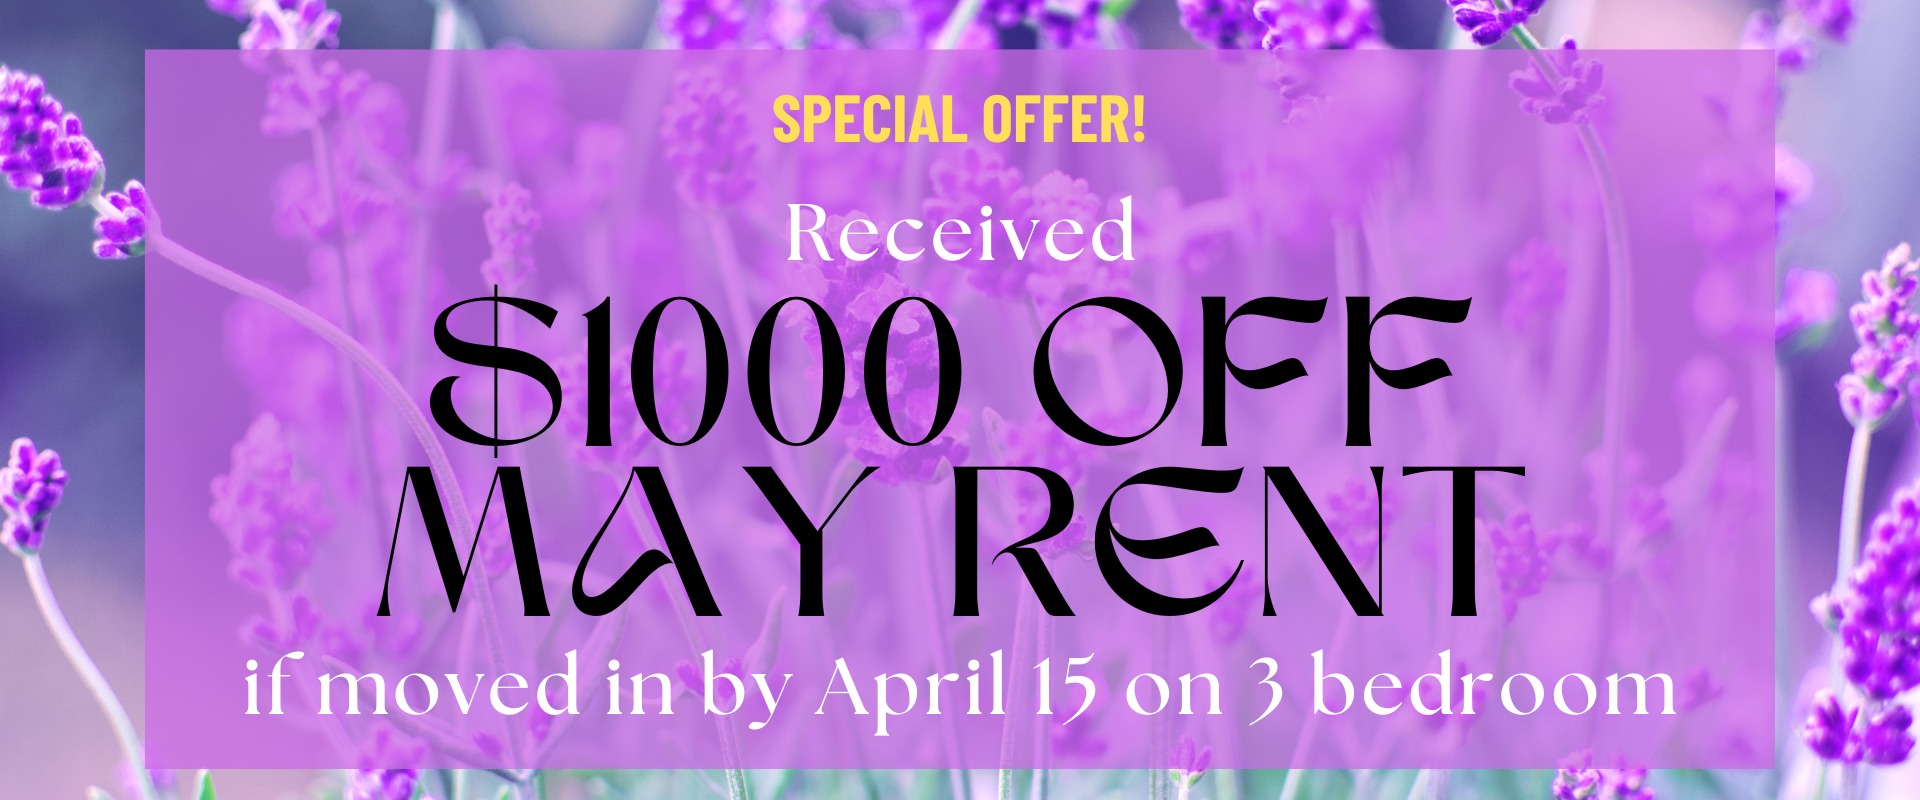 Received $1000 off May rent if moved in by April 15 on 3 bedroom